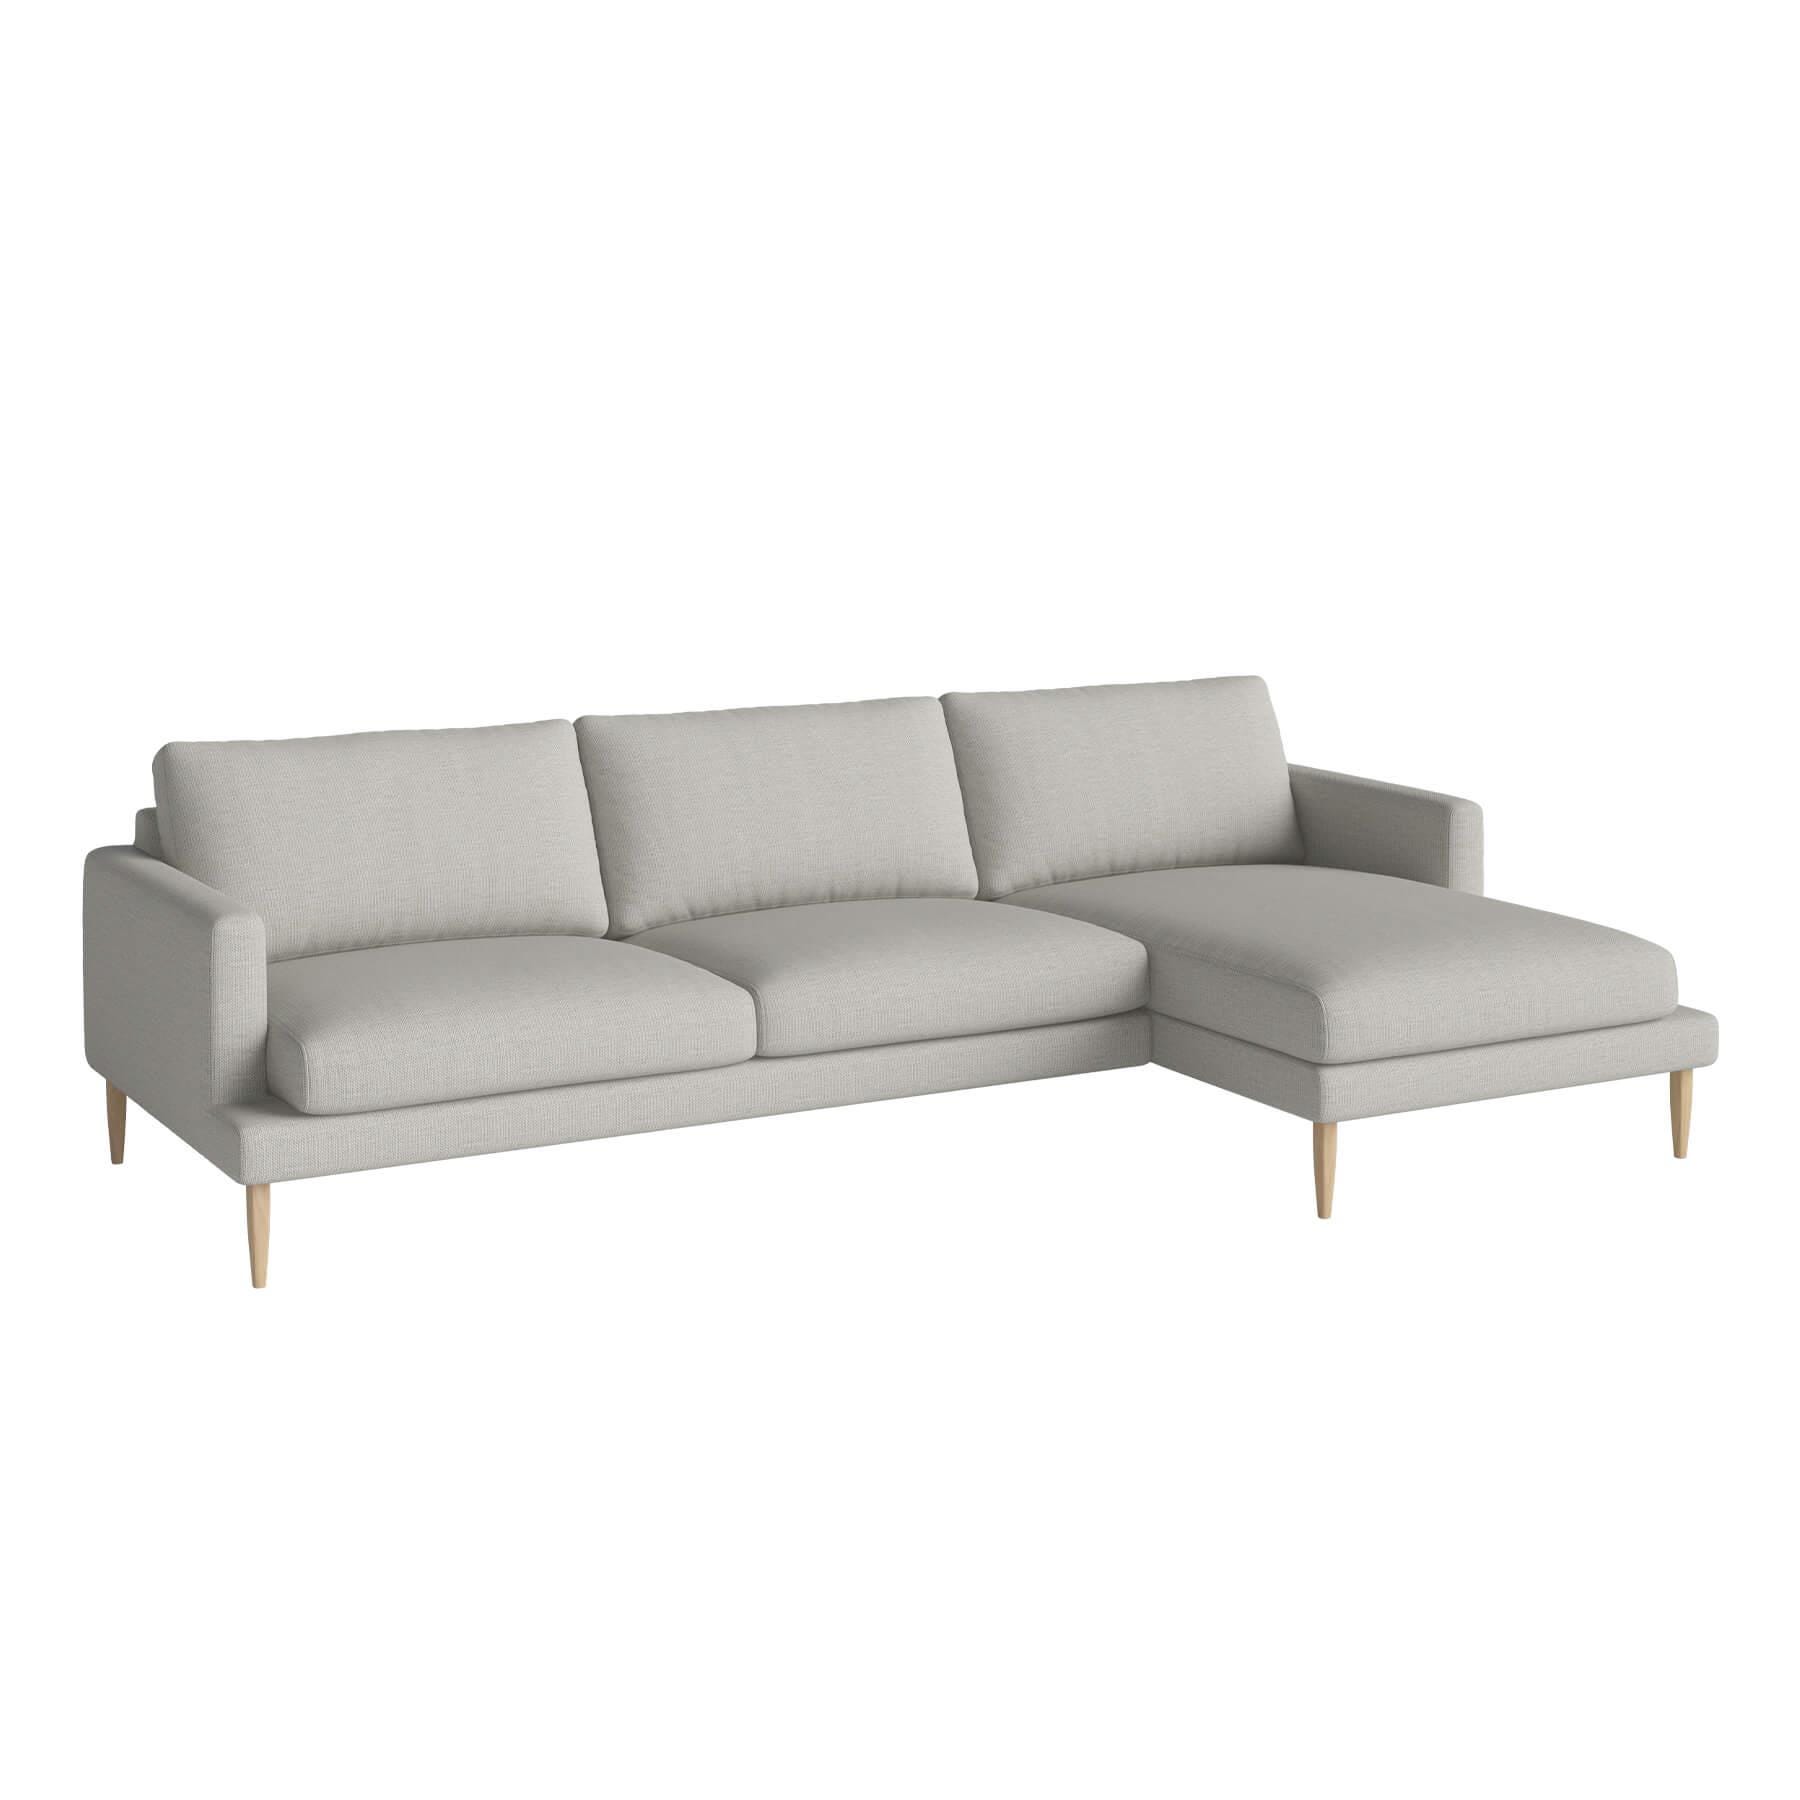 Bolia Veneda Sofa 35 Seater Sofa With Chaise Longue White Oiled Oak London Dust Green Right Grey Designer Furniture From Holloways Of Ludlow